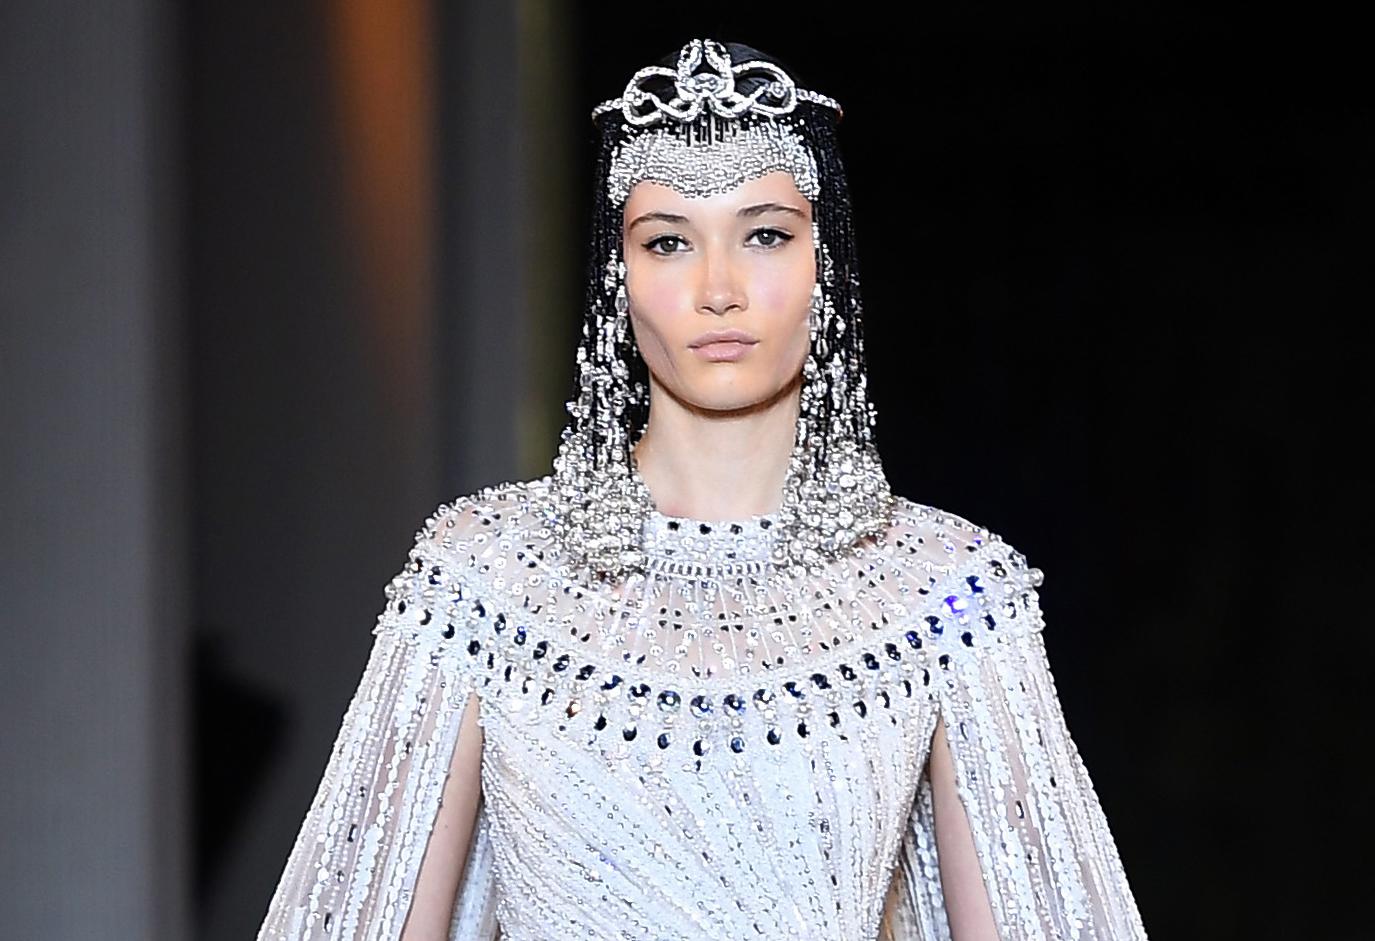 Zuhair Murad Looks To Ancient Egypt For Spring 2020 Couture Line Arab News Vlrengbr